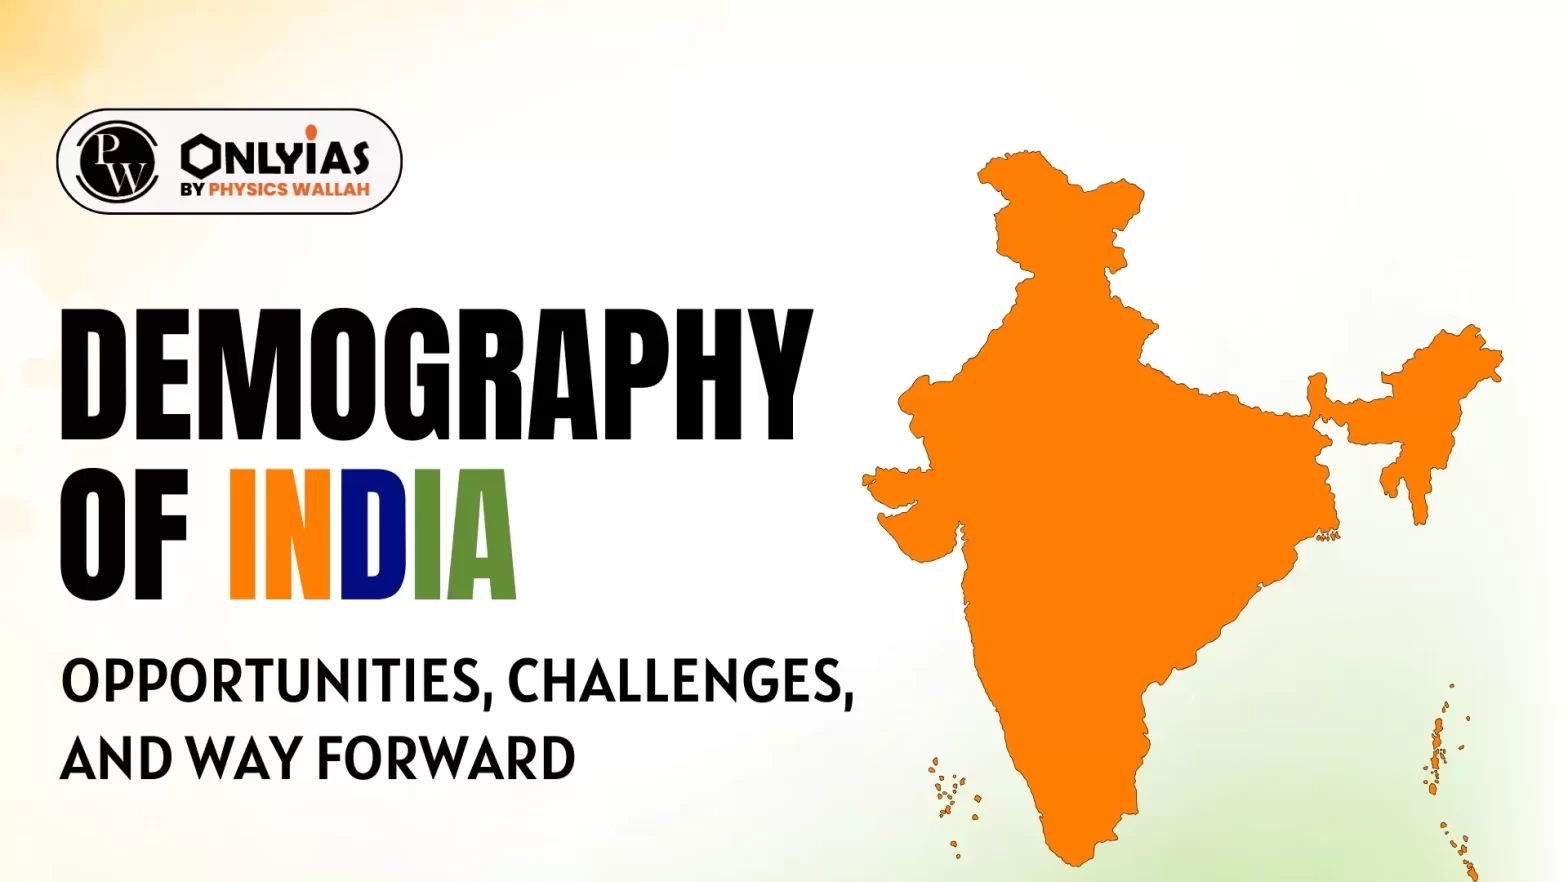 Demography of India: Opportunities, Challenges, and Way Forward